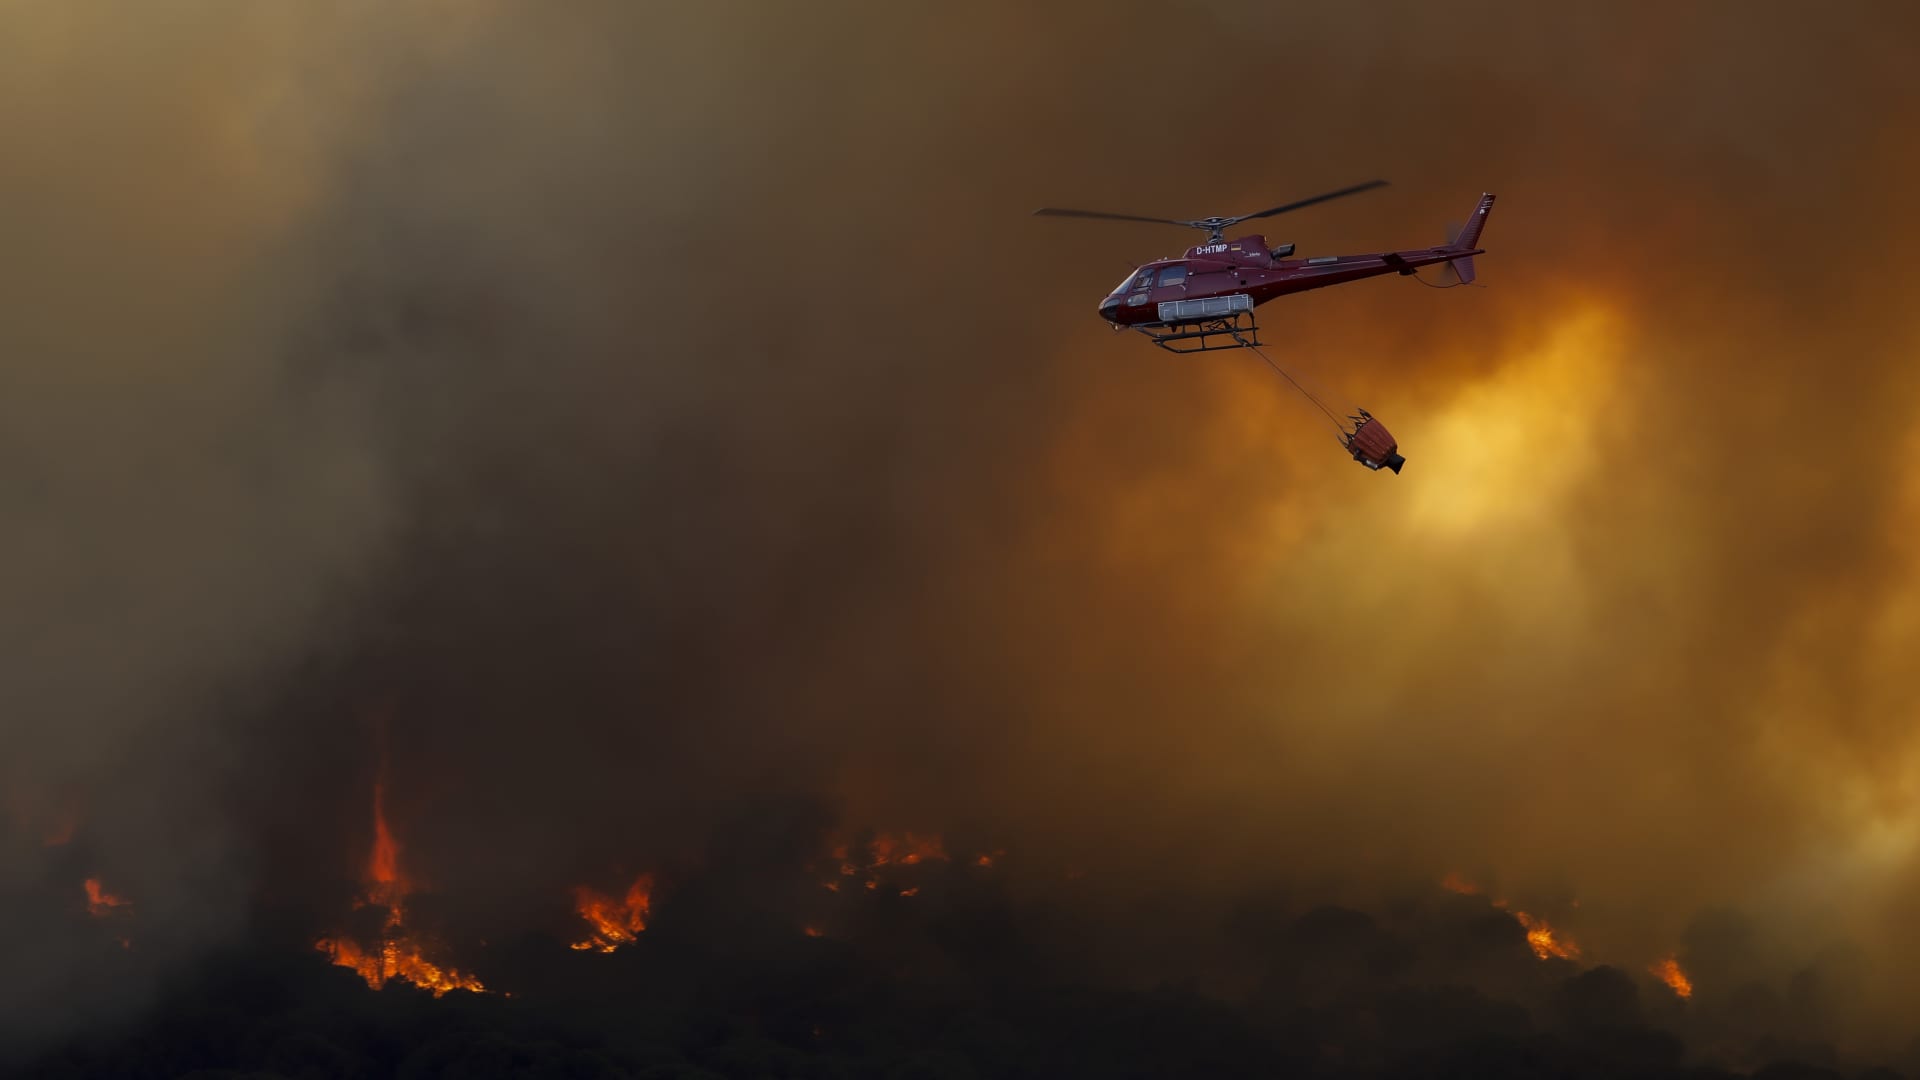 A helicopter works during a forest fire in Cebreros on July 18, 2022 in Avila, Spain.